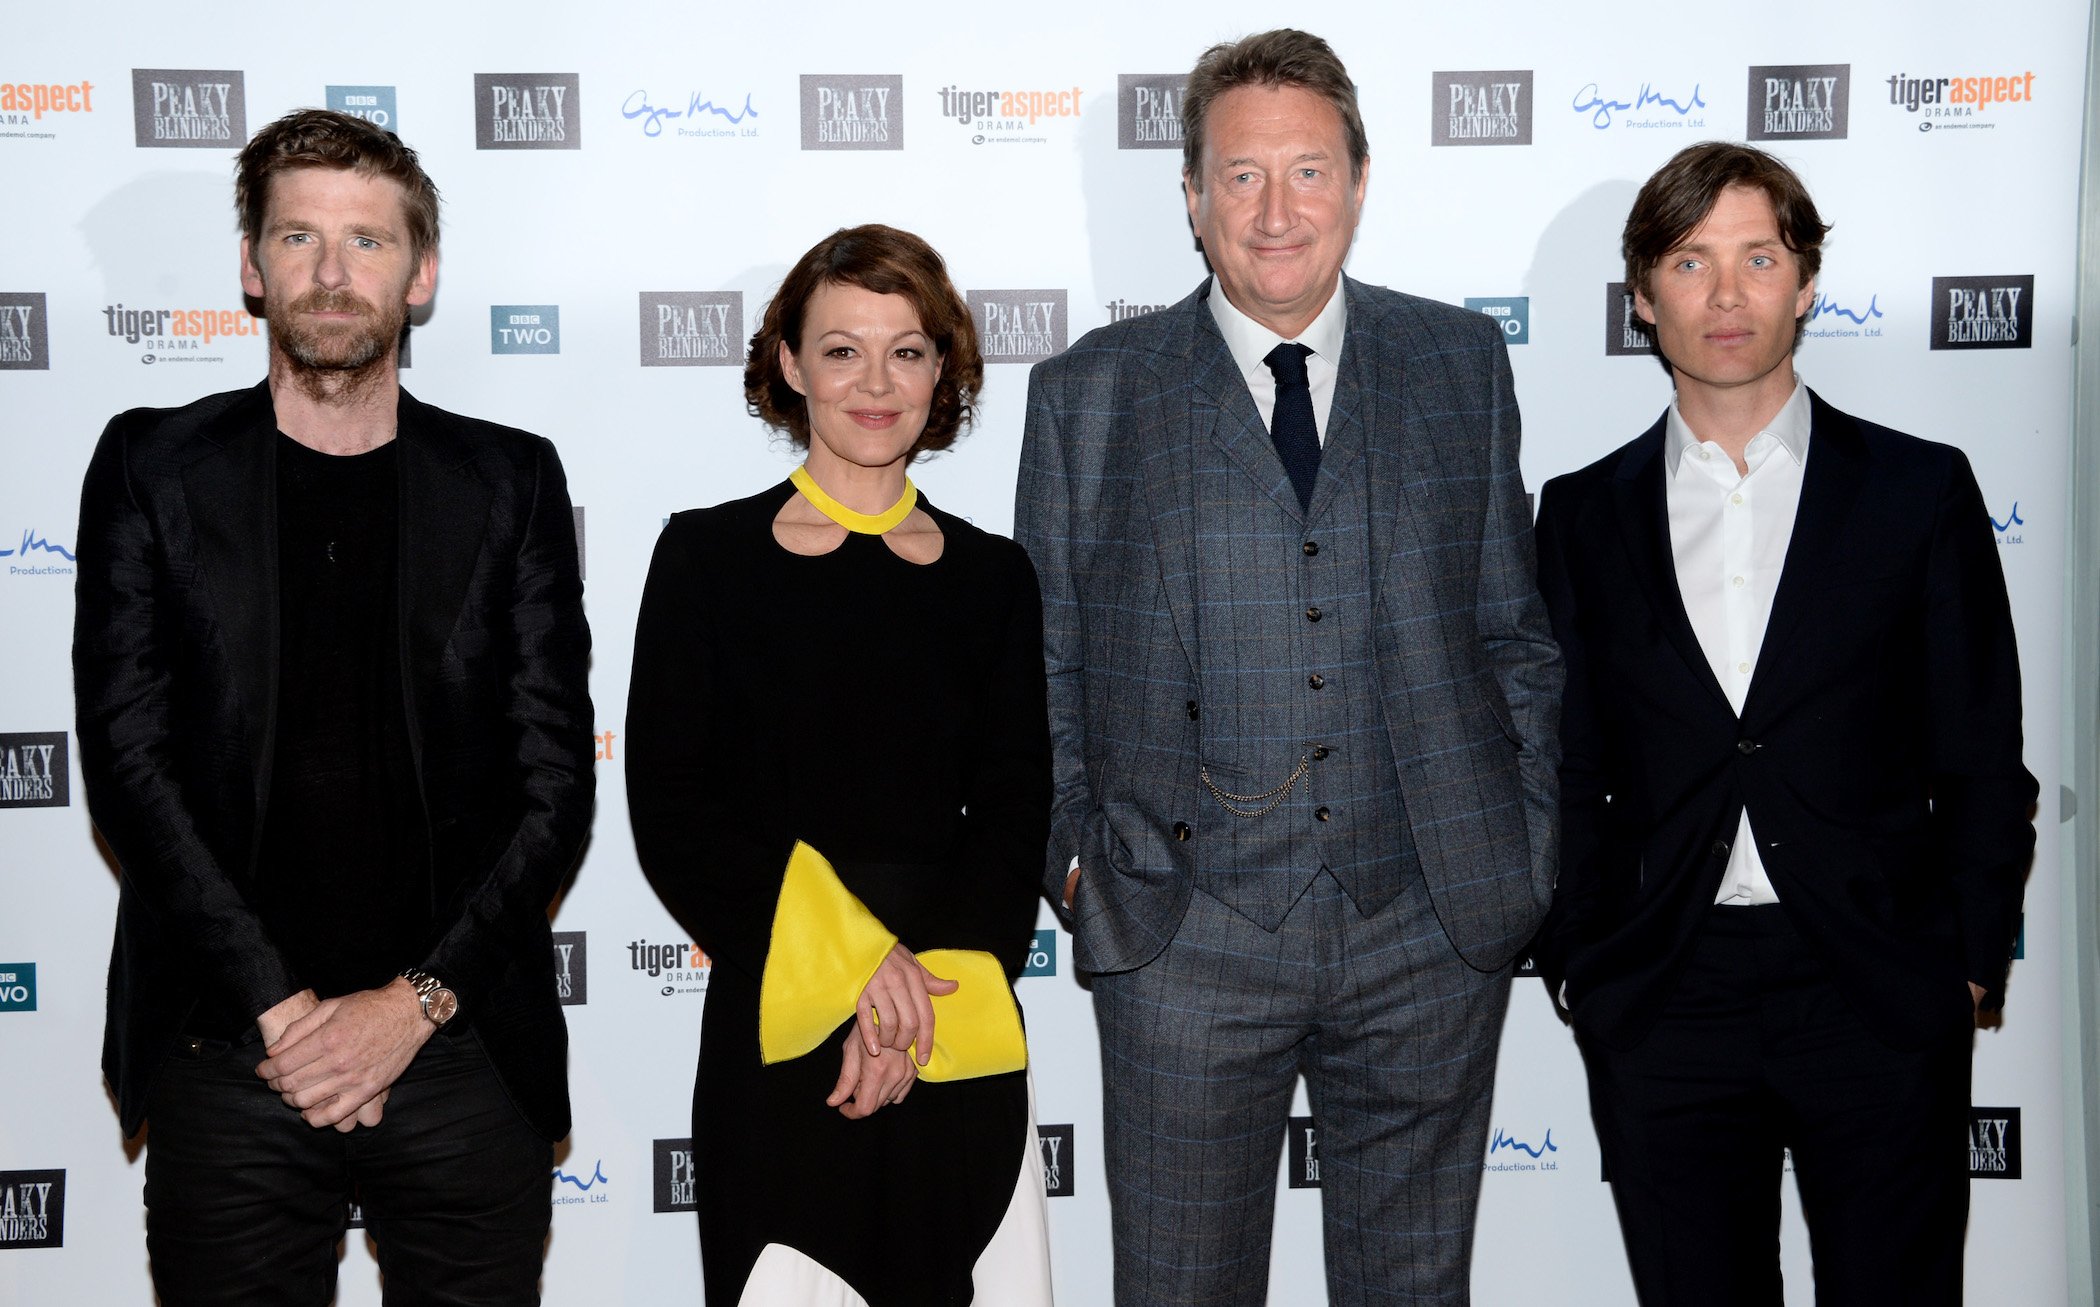 'Peaky Blinders' Season 6 stars Paul Anderson, Helen McCrory, Steven Knight, and Cillian Murphy standing next to each other at an event